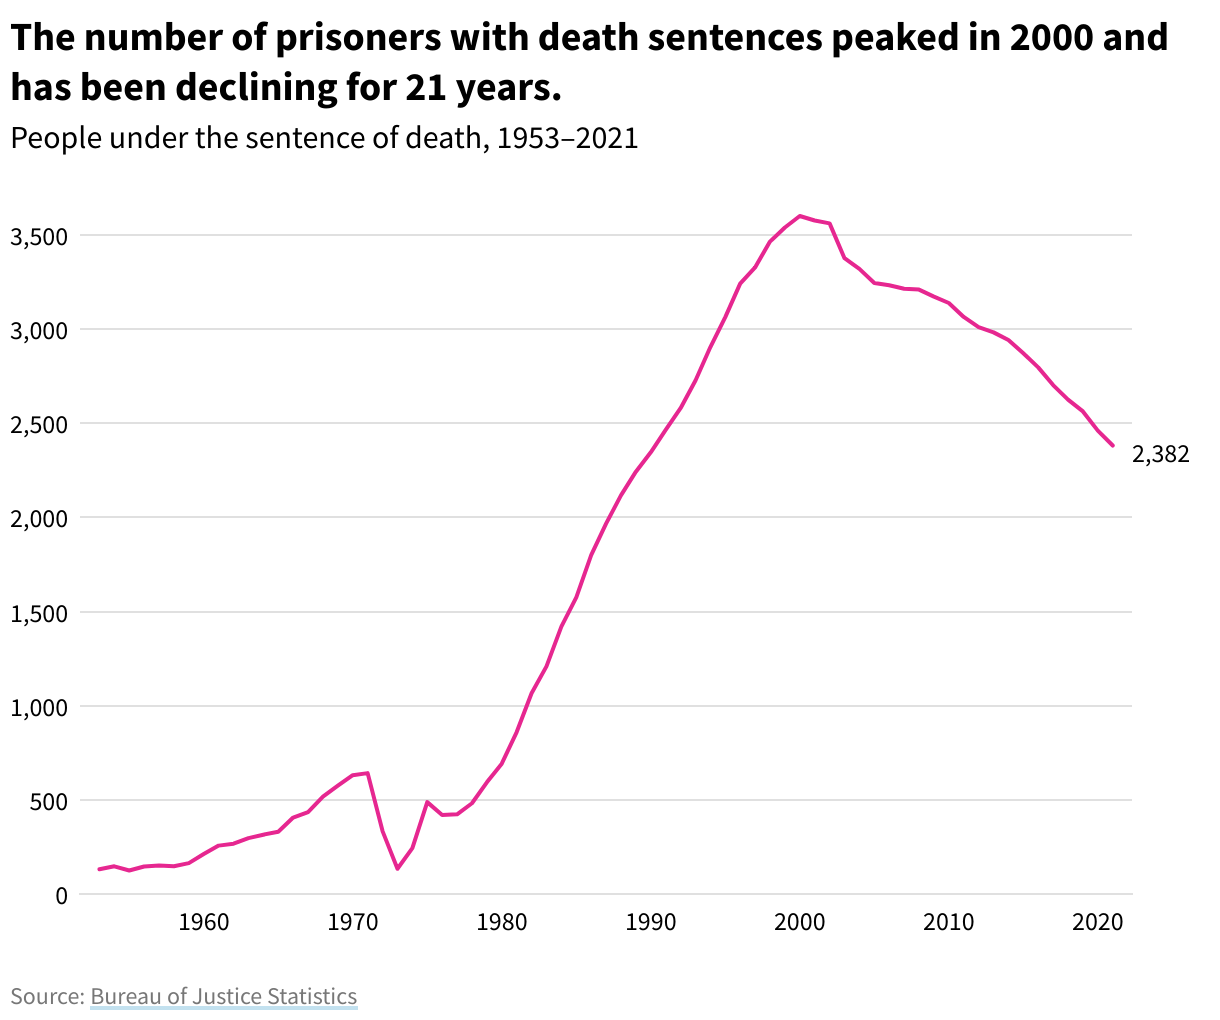 Line graph showing the number of people under the sentence of death from 1953-2021. 2,382 prisoners were under the sentence of death in 2021. 